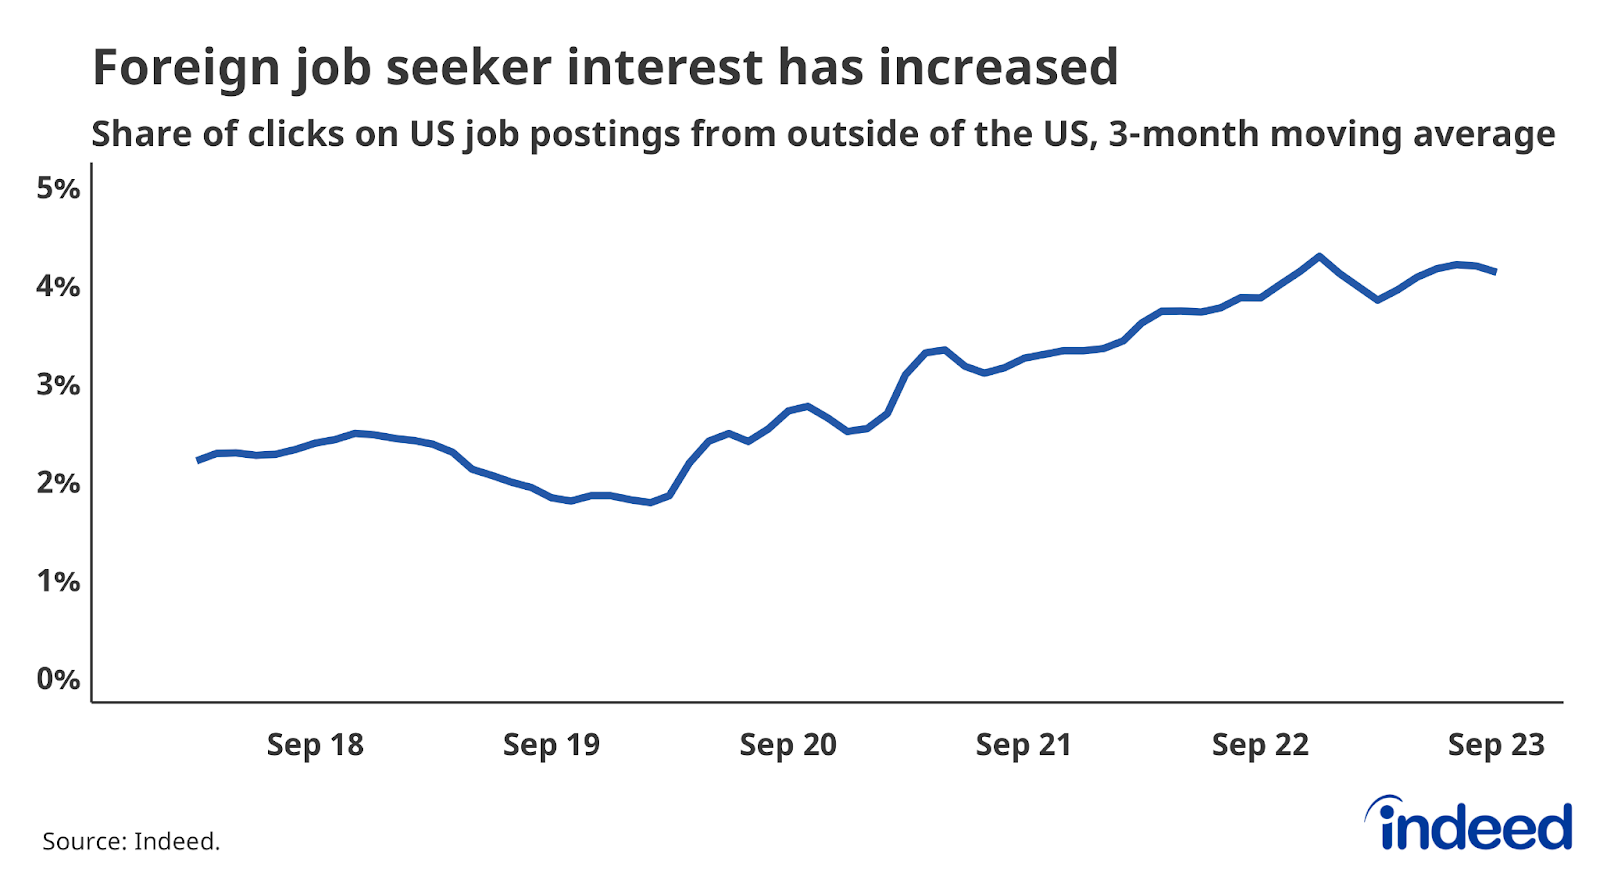 A line graph titled “Foreign job seeker interest has increased” shows the share of clicks on US job postings from outside the US. The share has increased from 2018 and 2019 levels of roughly 2% and now stands at a bit more than 4%.